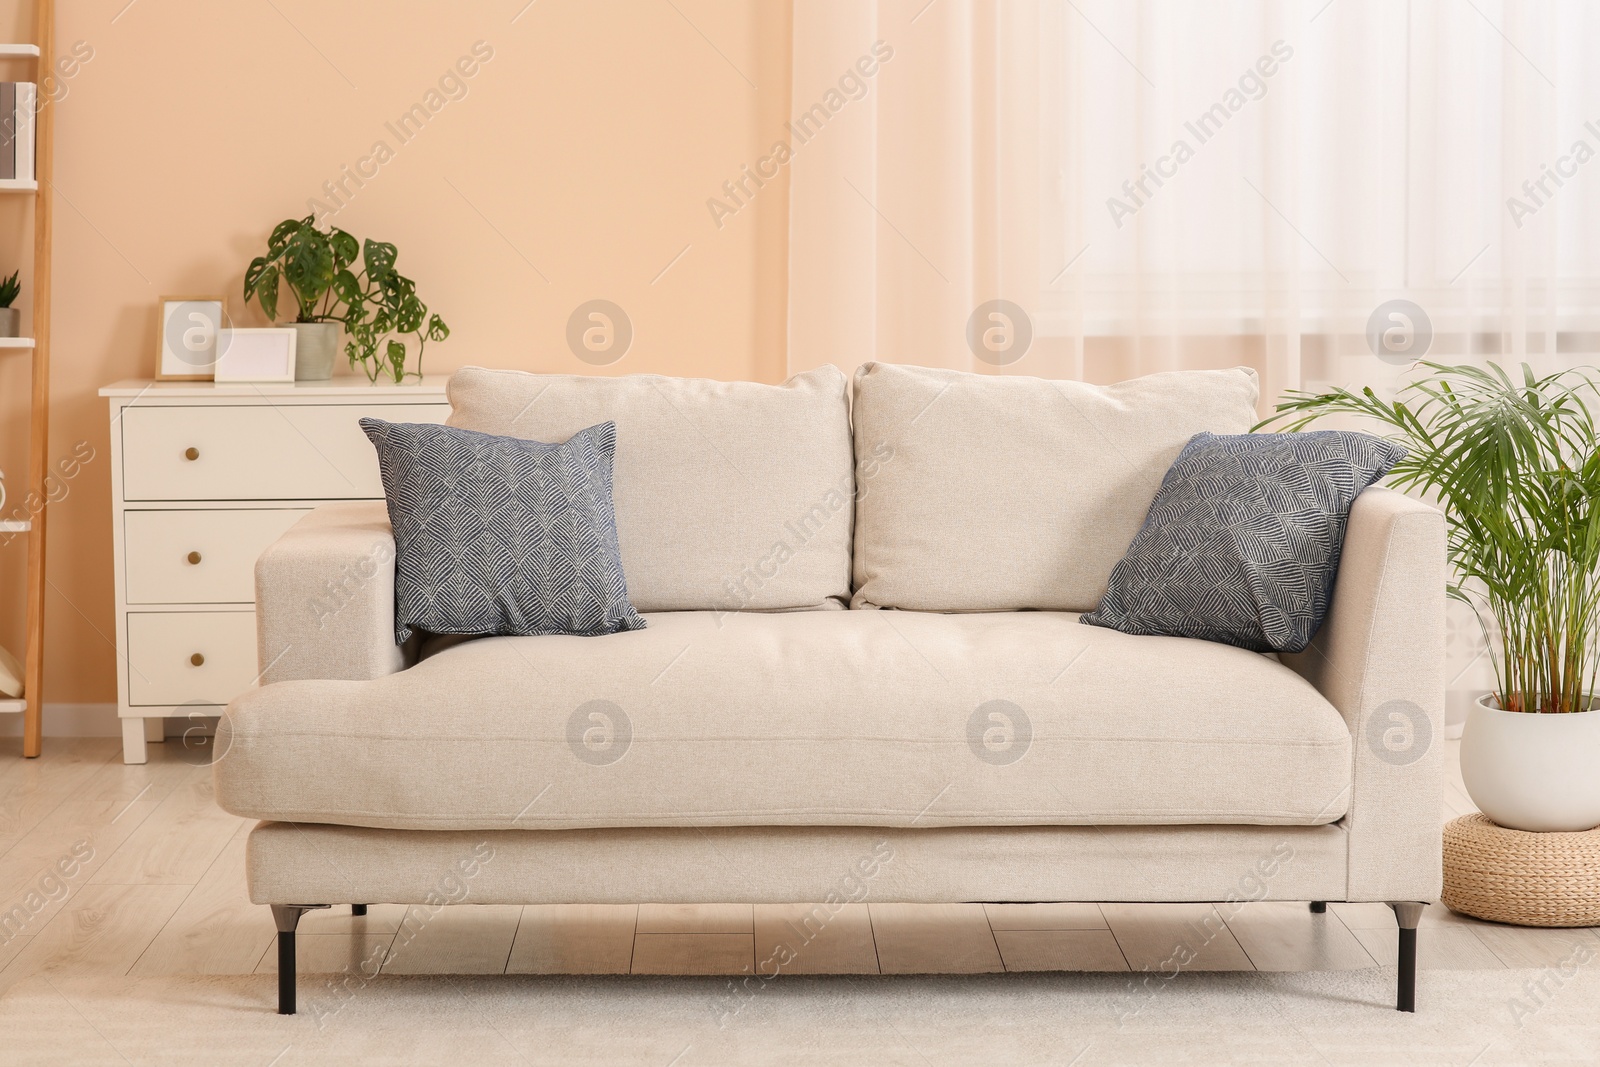 Photo of Comfortable sofa and potted plants in living room. Interior design